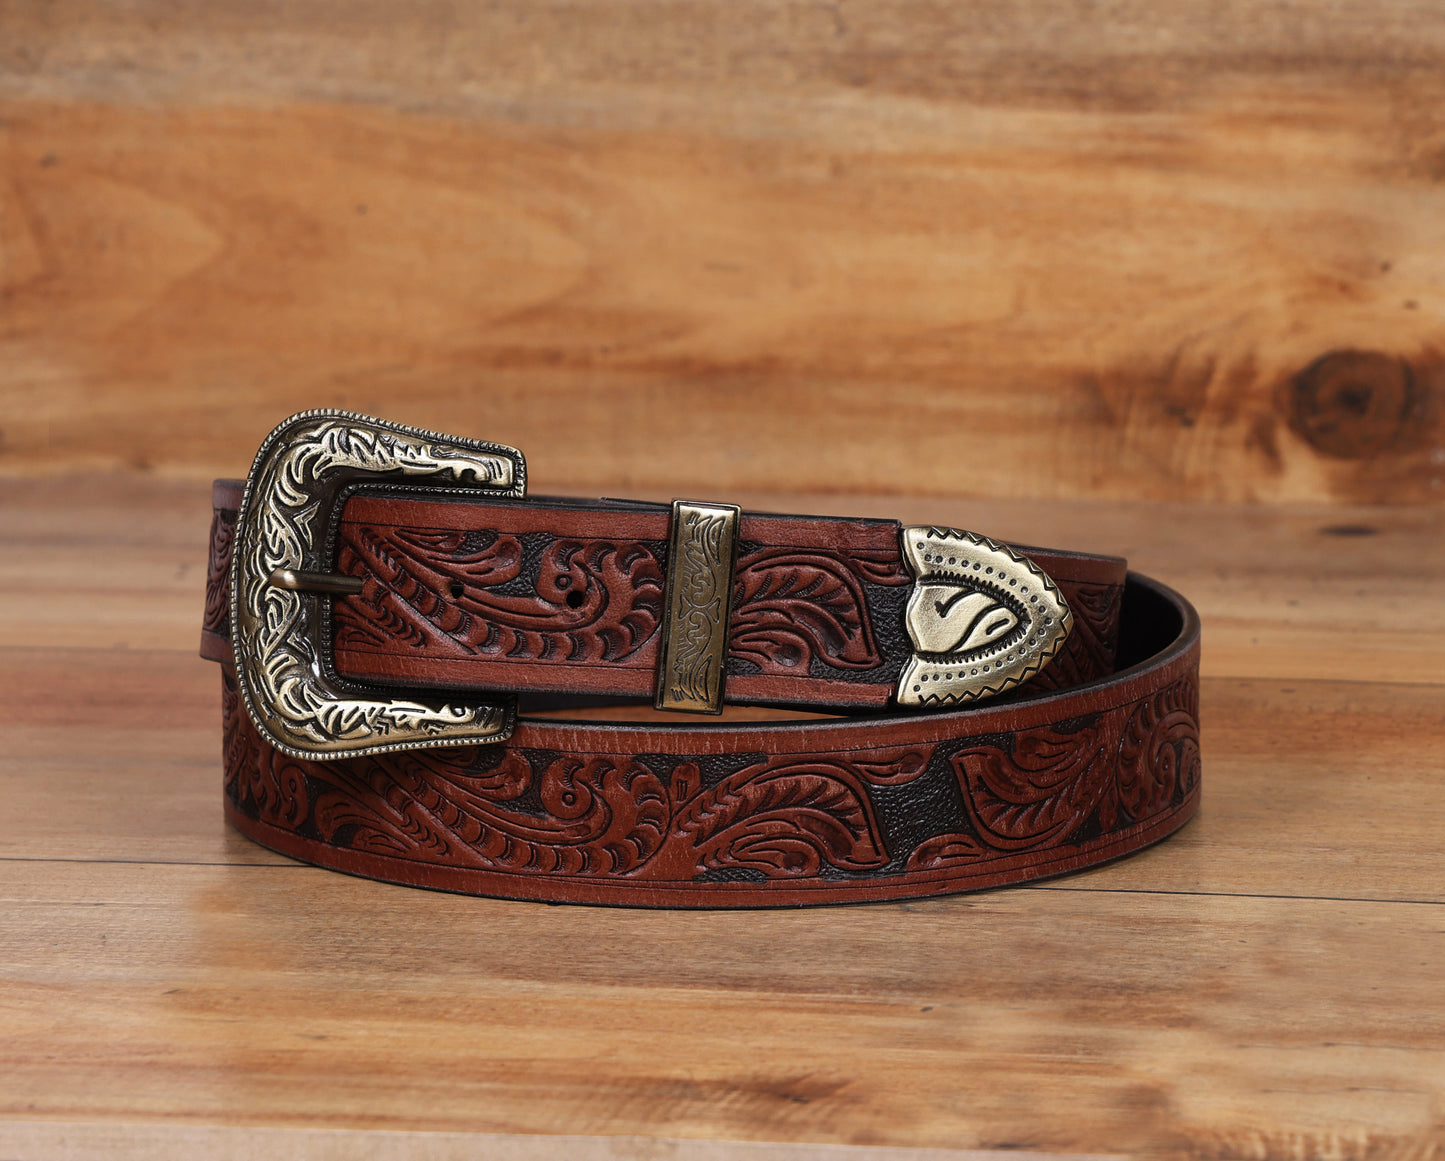 "Artisanal Mastery: Hand-Carved Leather Belts for Timeless Style" Art: LB-811